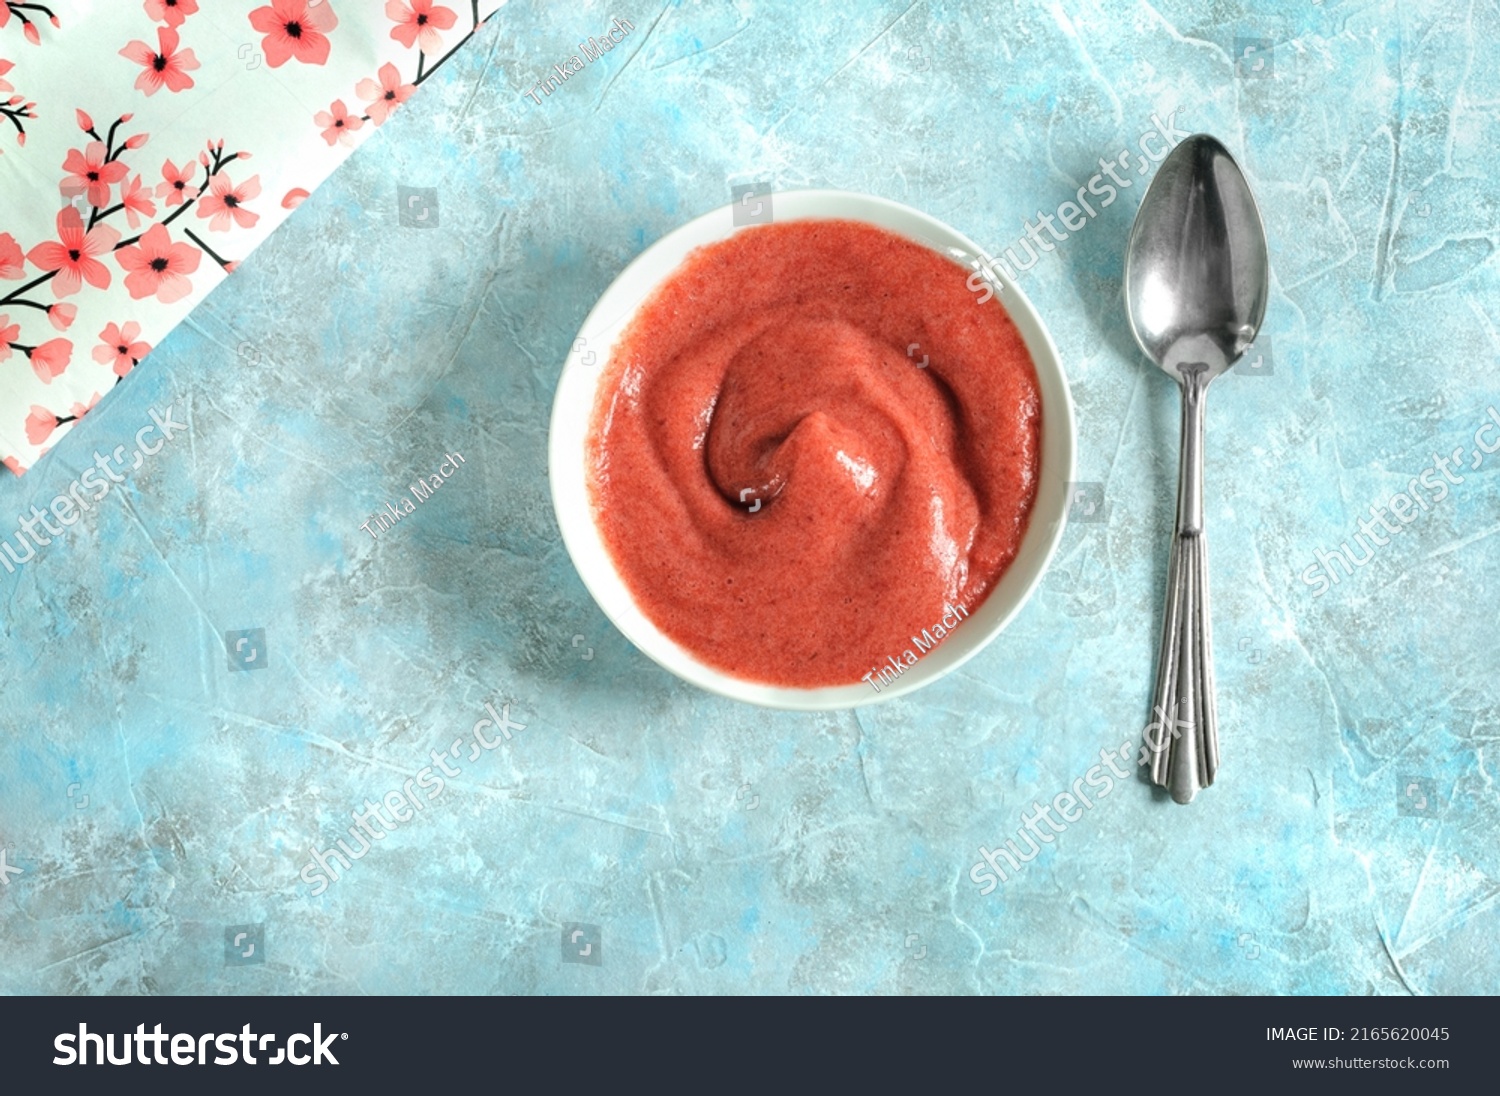 Yogurt, cream, mousse or smoothie in a white ceramic plate with a spoon on a blue marble background. Daylight, selective focus. View from above #2165620045